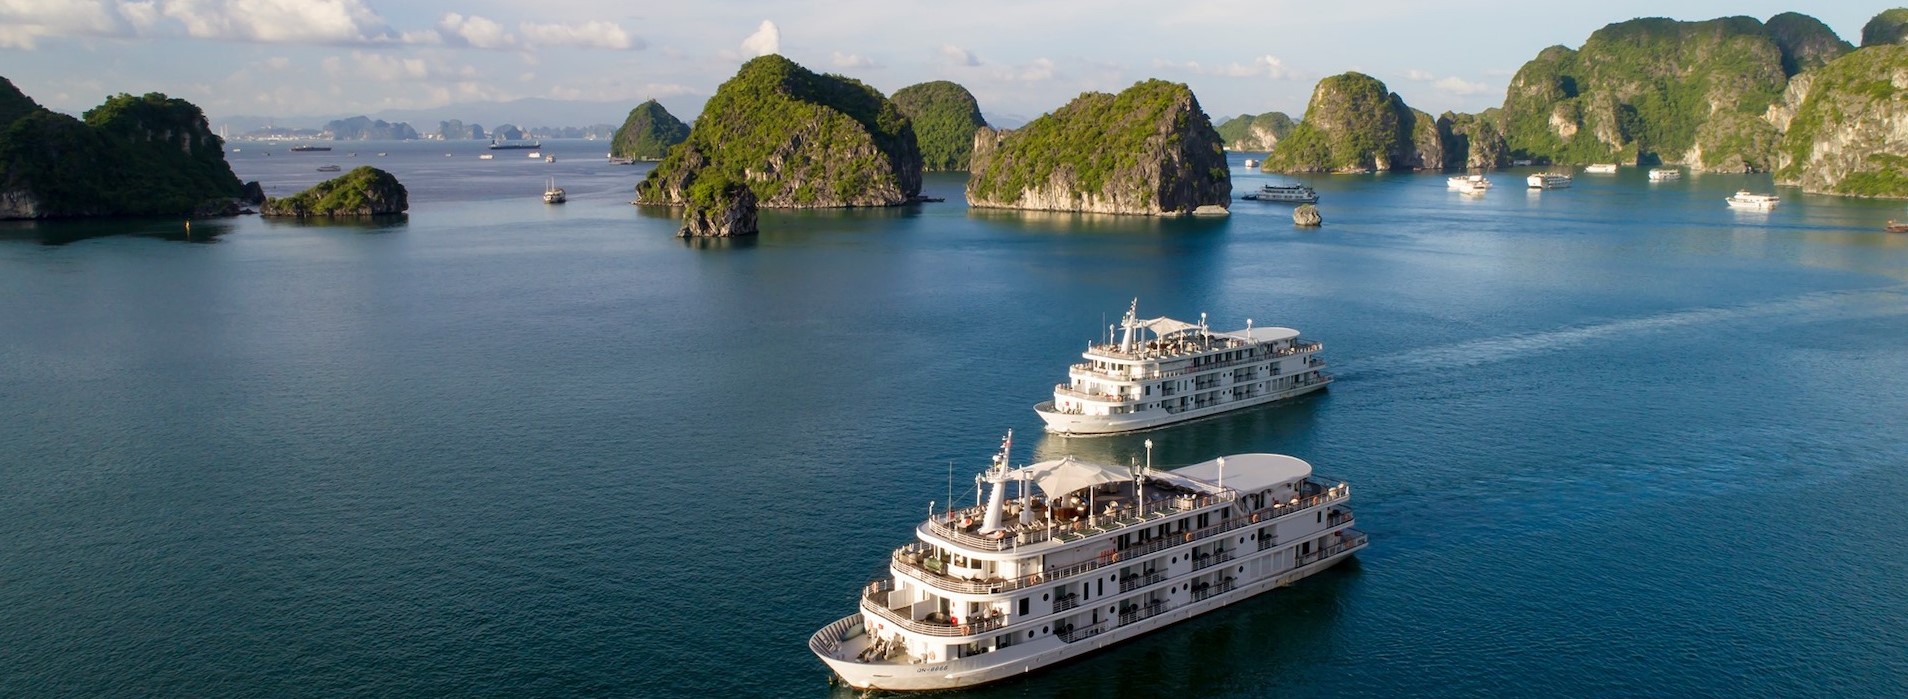 Comment visiter Baie Halong ?